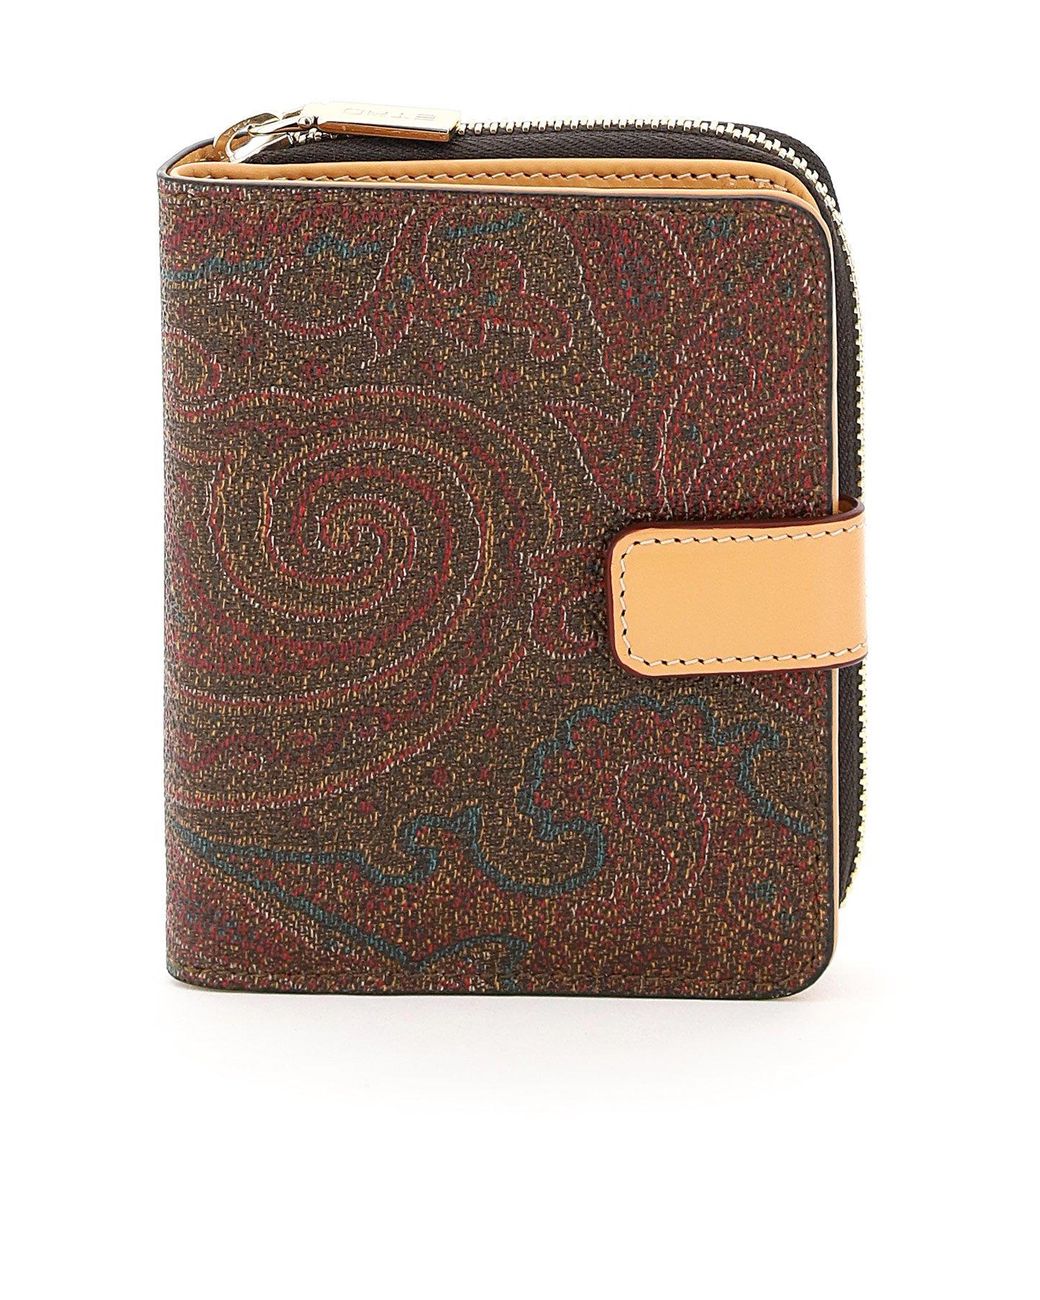 Etro Canvas Paisley Wallet in Red (Brown) - Save 17% - Lyst